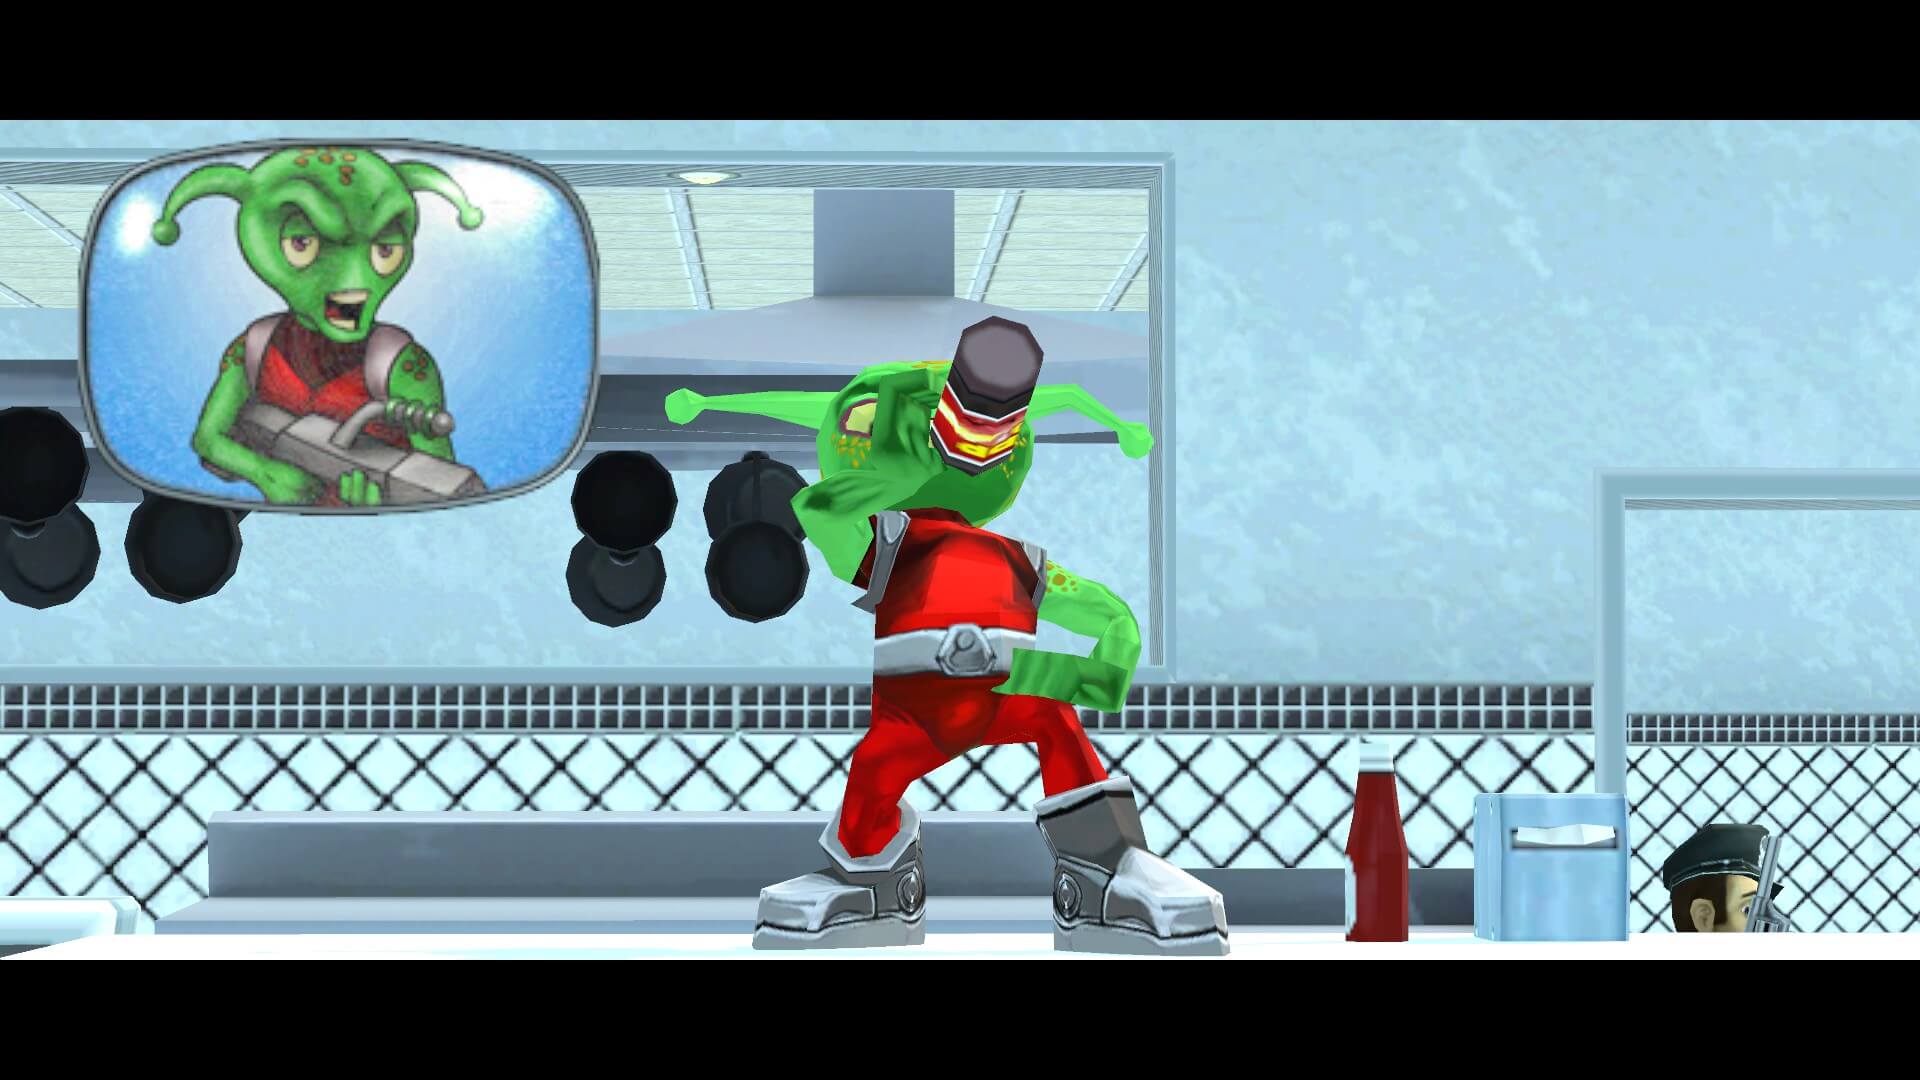 A Martian is drinking a Zapp-o-Cola which is one of the items in the game that provide health. The Tv on the left is meant to show that the character I talking. 